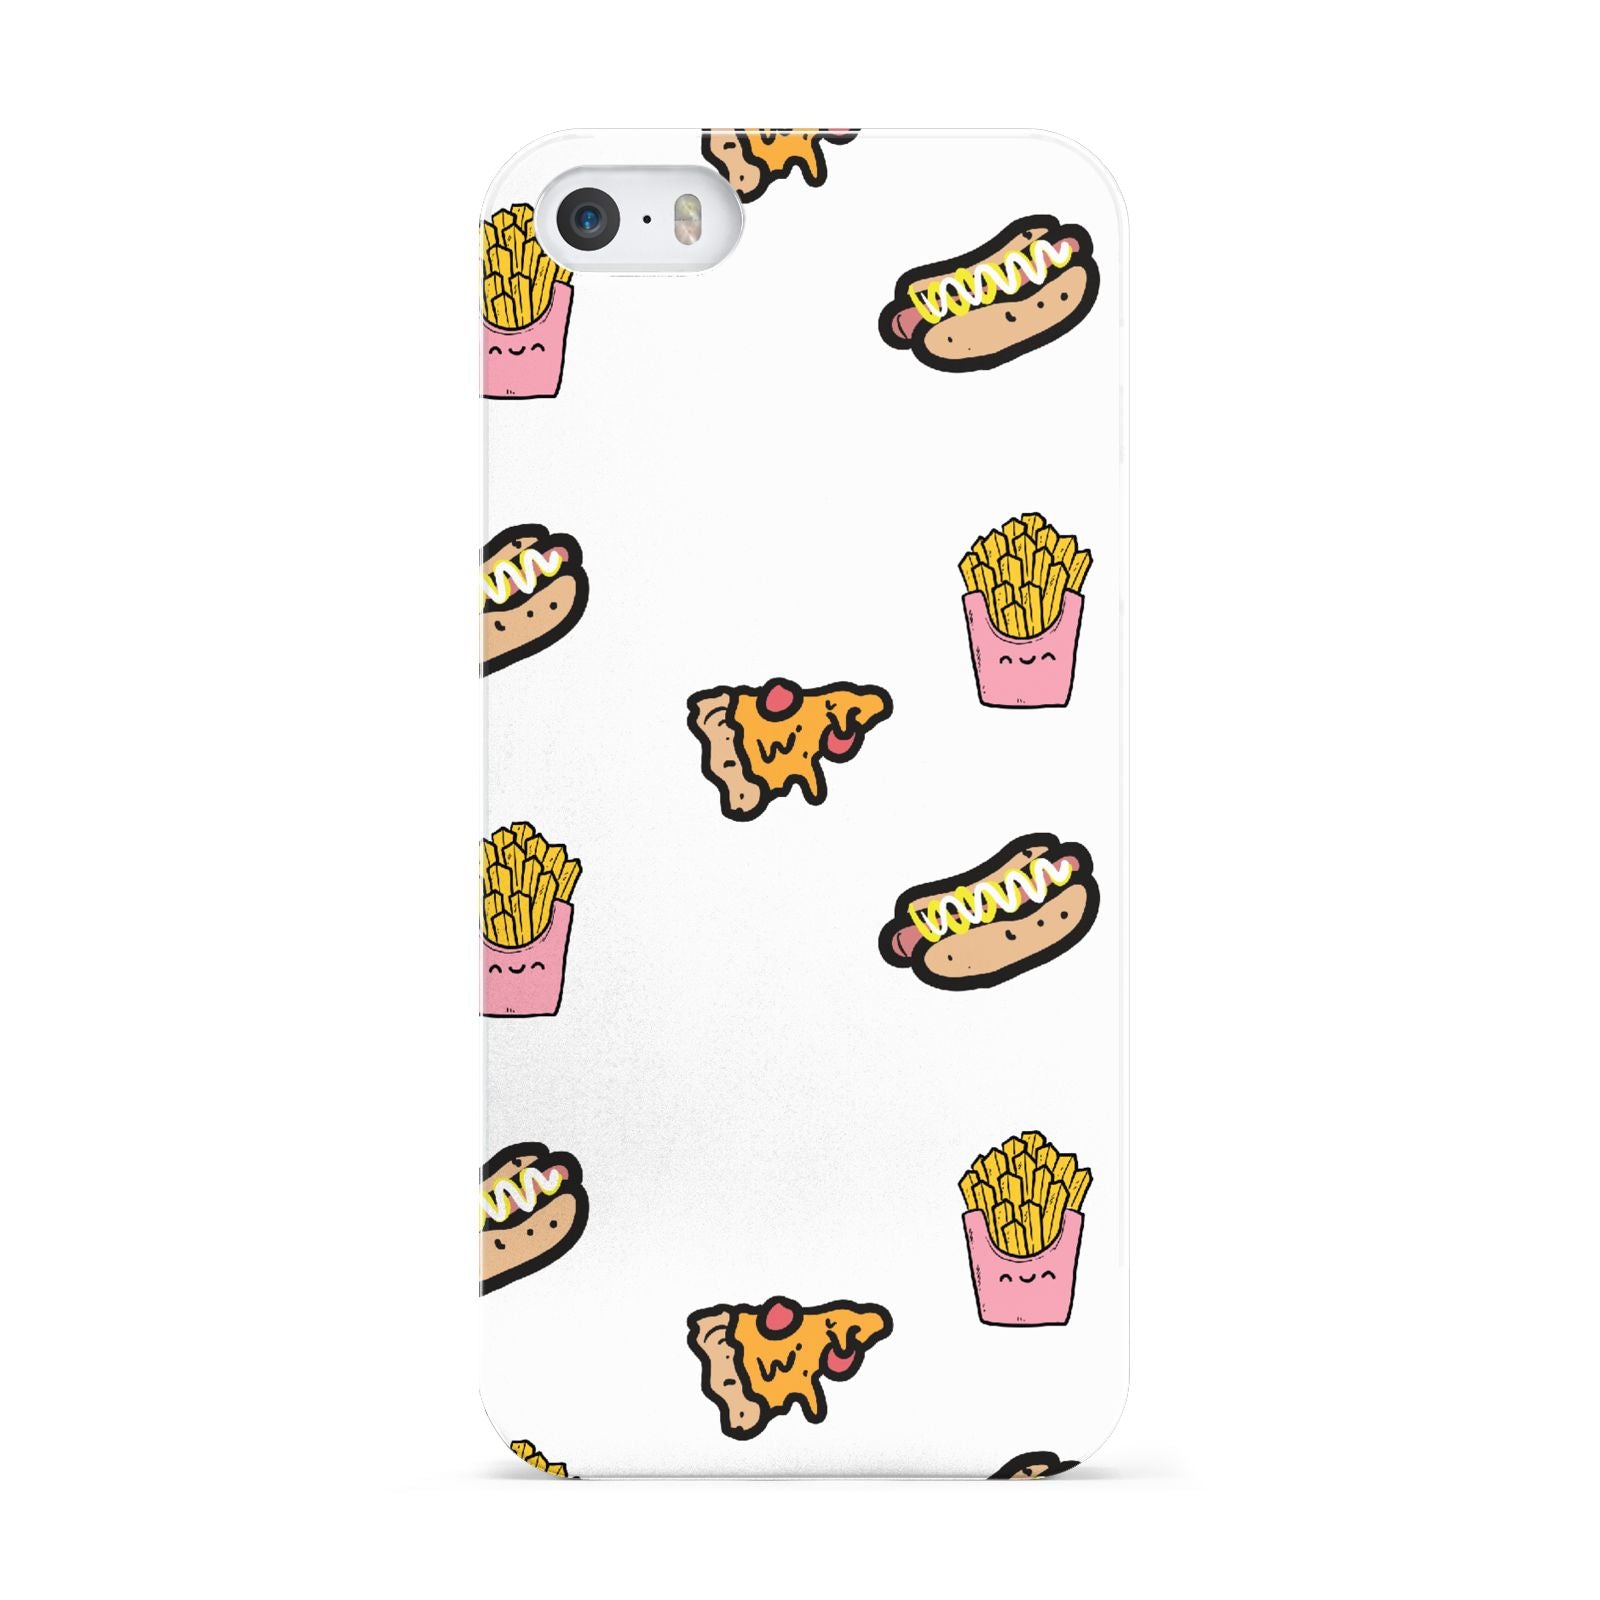 Fries Pizza Hot Dog Apple iPhone 5 Case